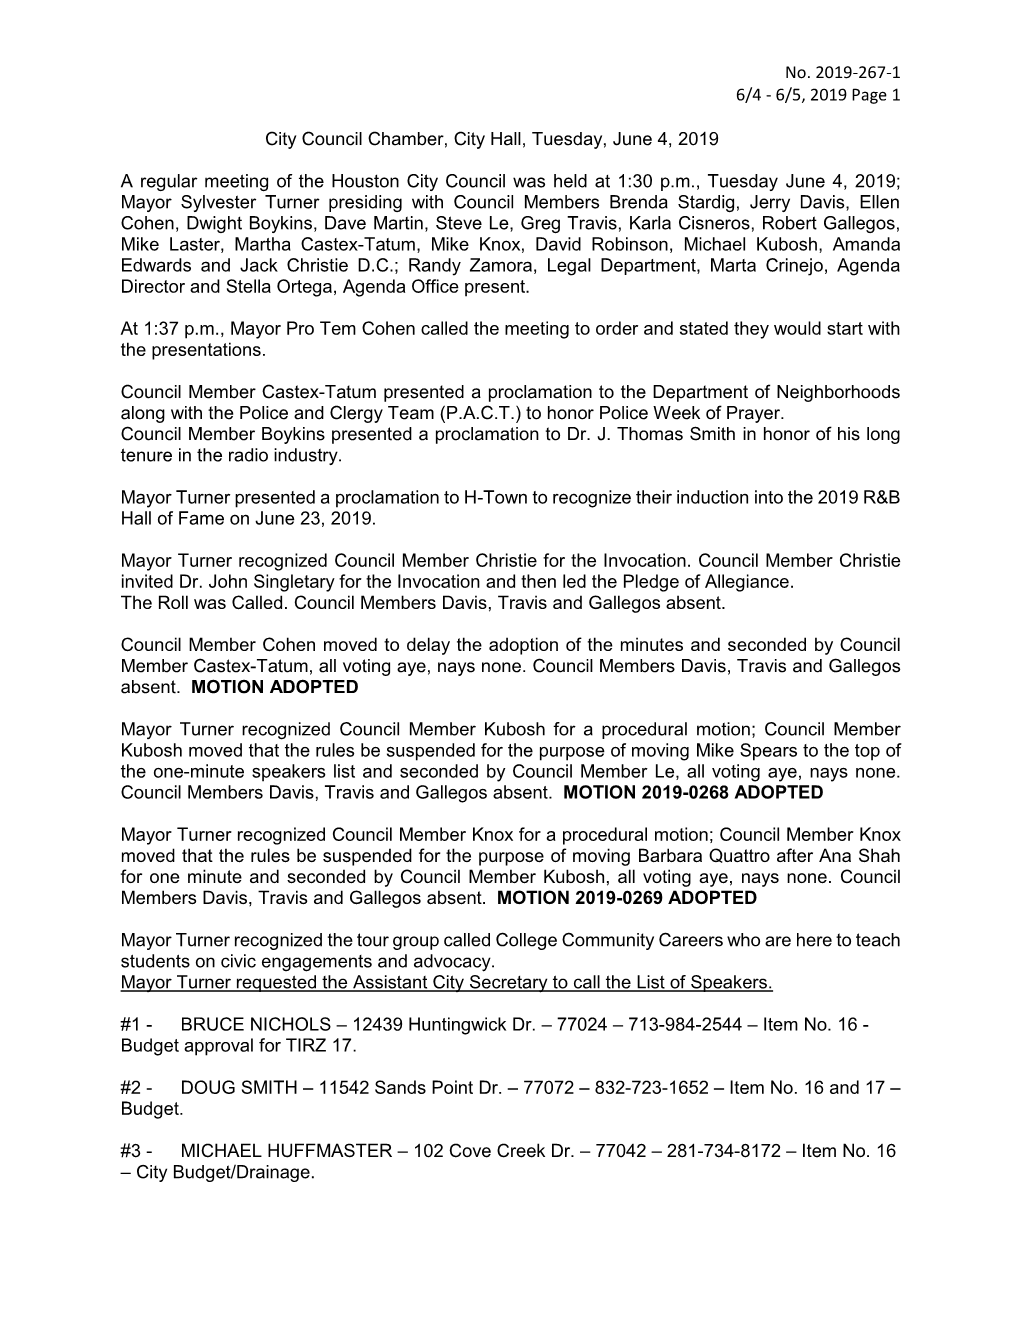 6/5, 2019 Page 1 City Council Chamber, City Hall, Tuesday, June 4, 2019 a Regular Meeting of the Houston Ci